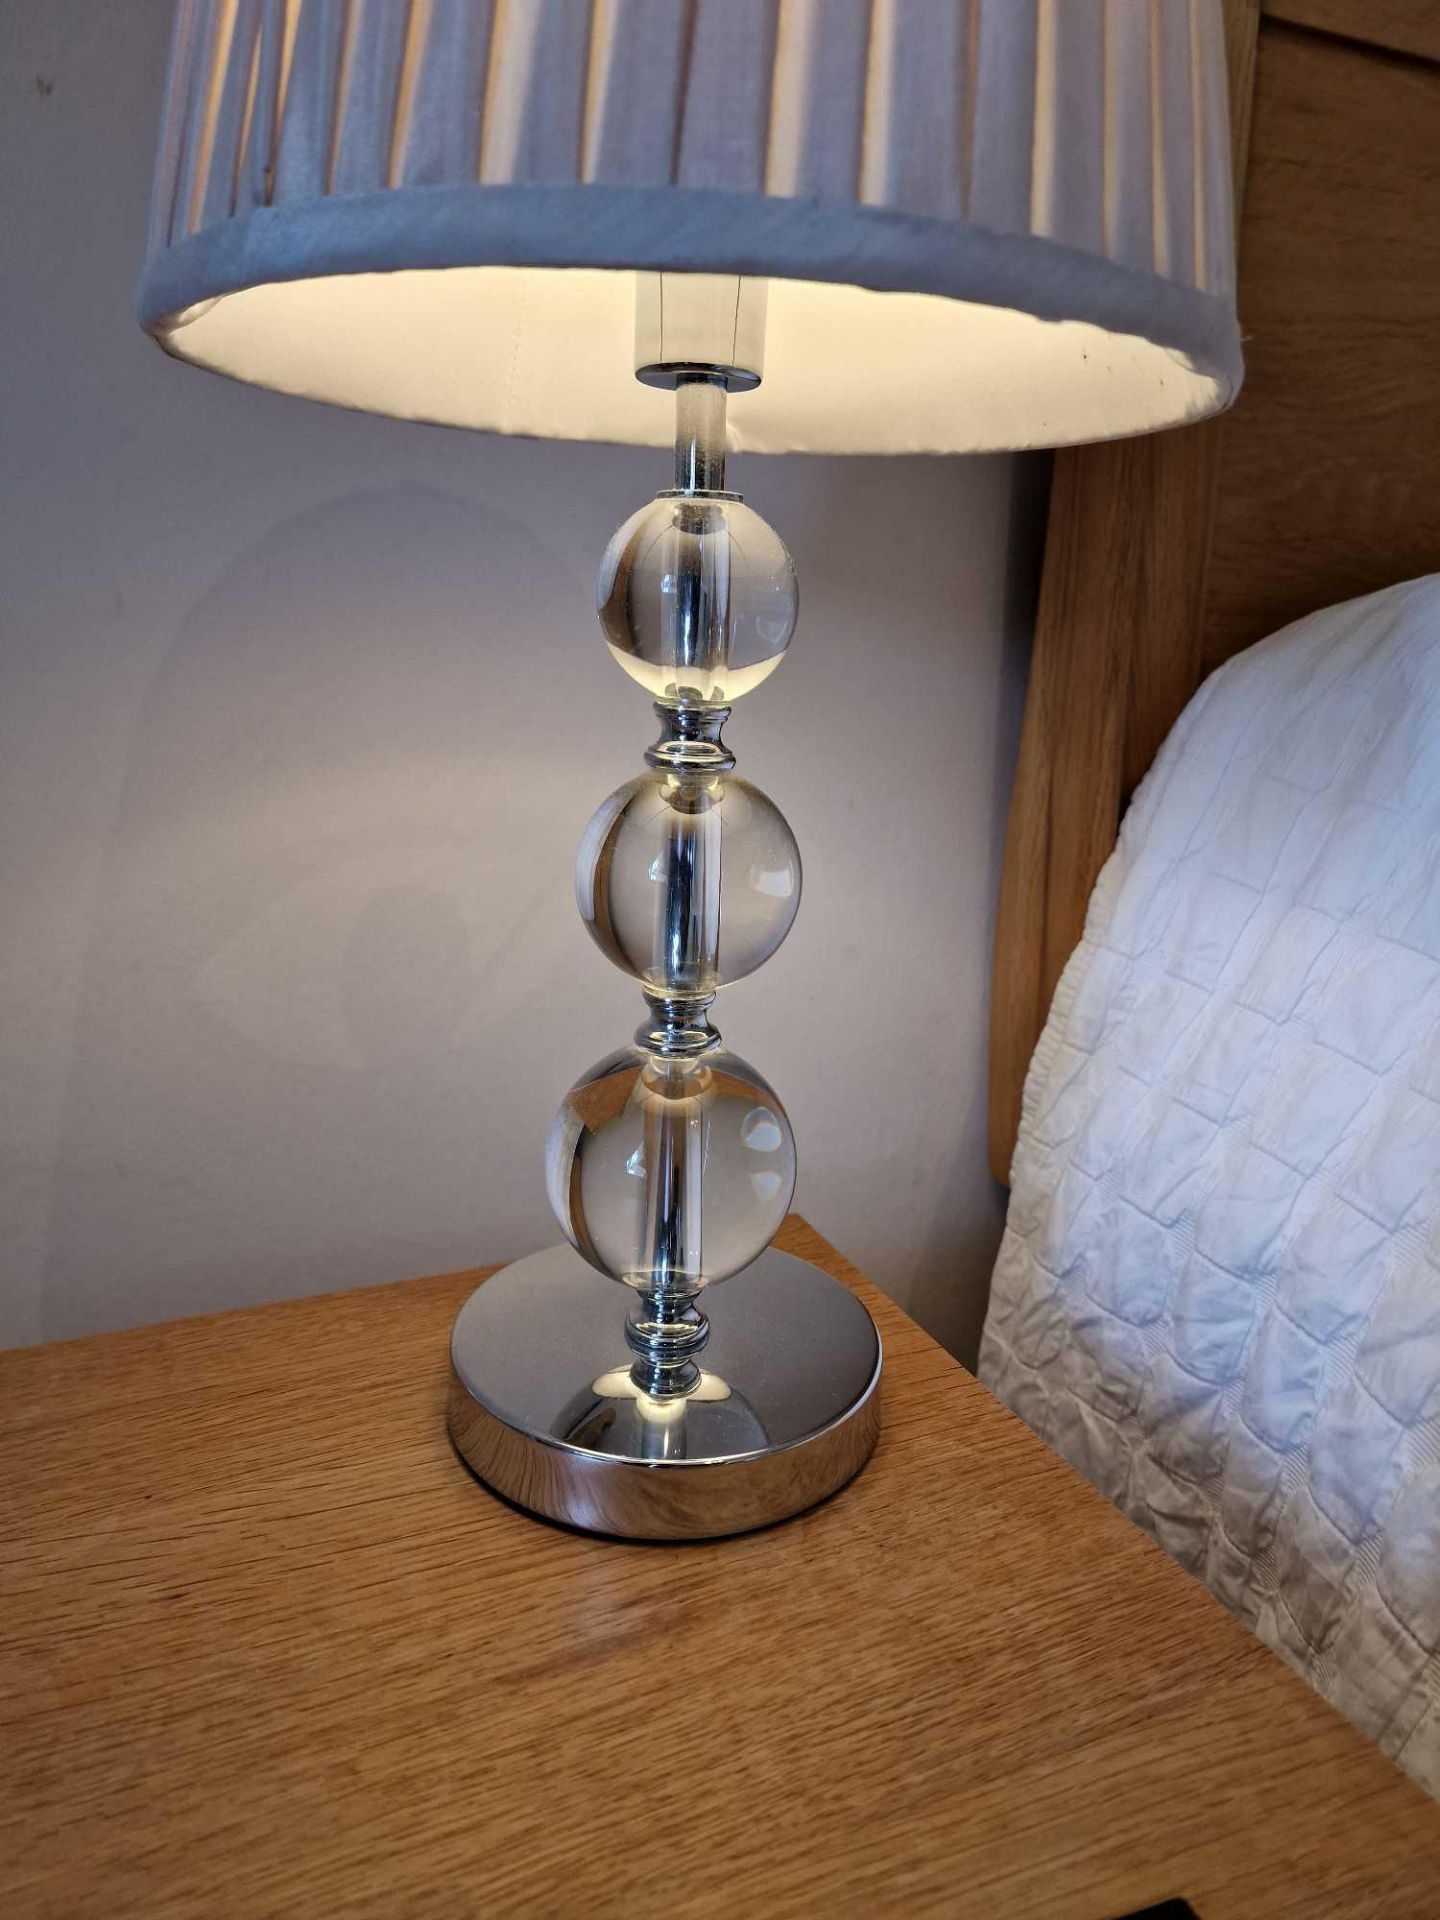 A Pair Of Classic Stacked Orb Table Lamps With Linen Shade A Table Lamp Of Elegance And Grace, - Bild 2 aus 2